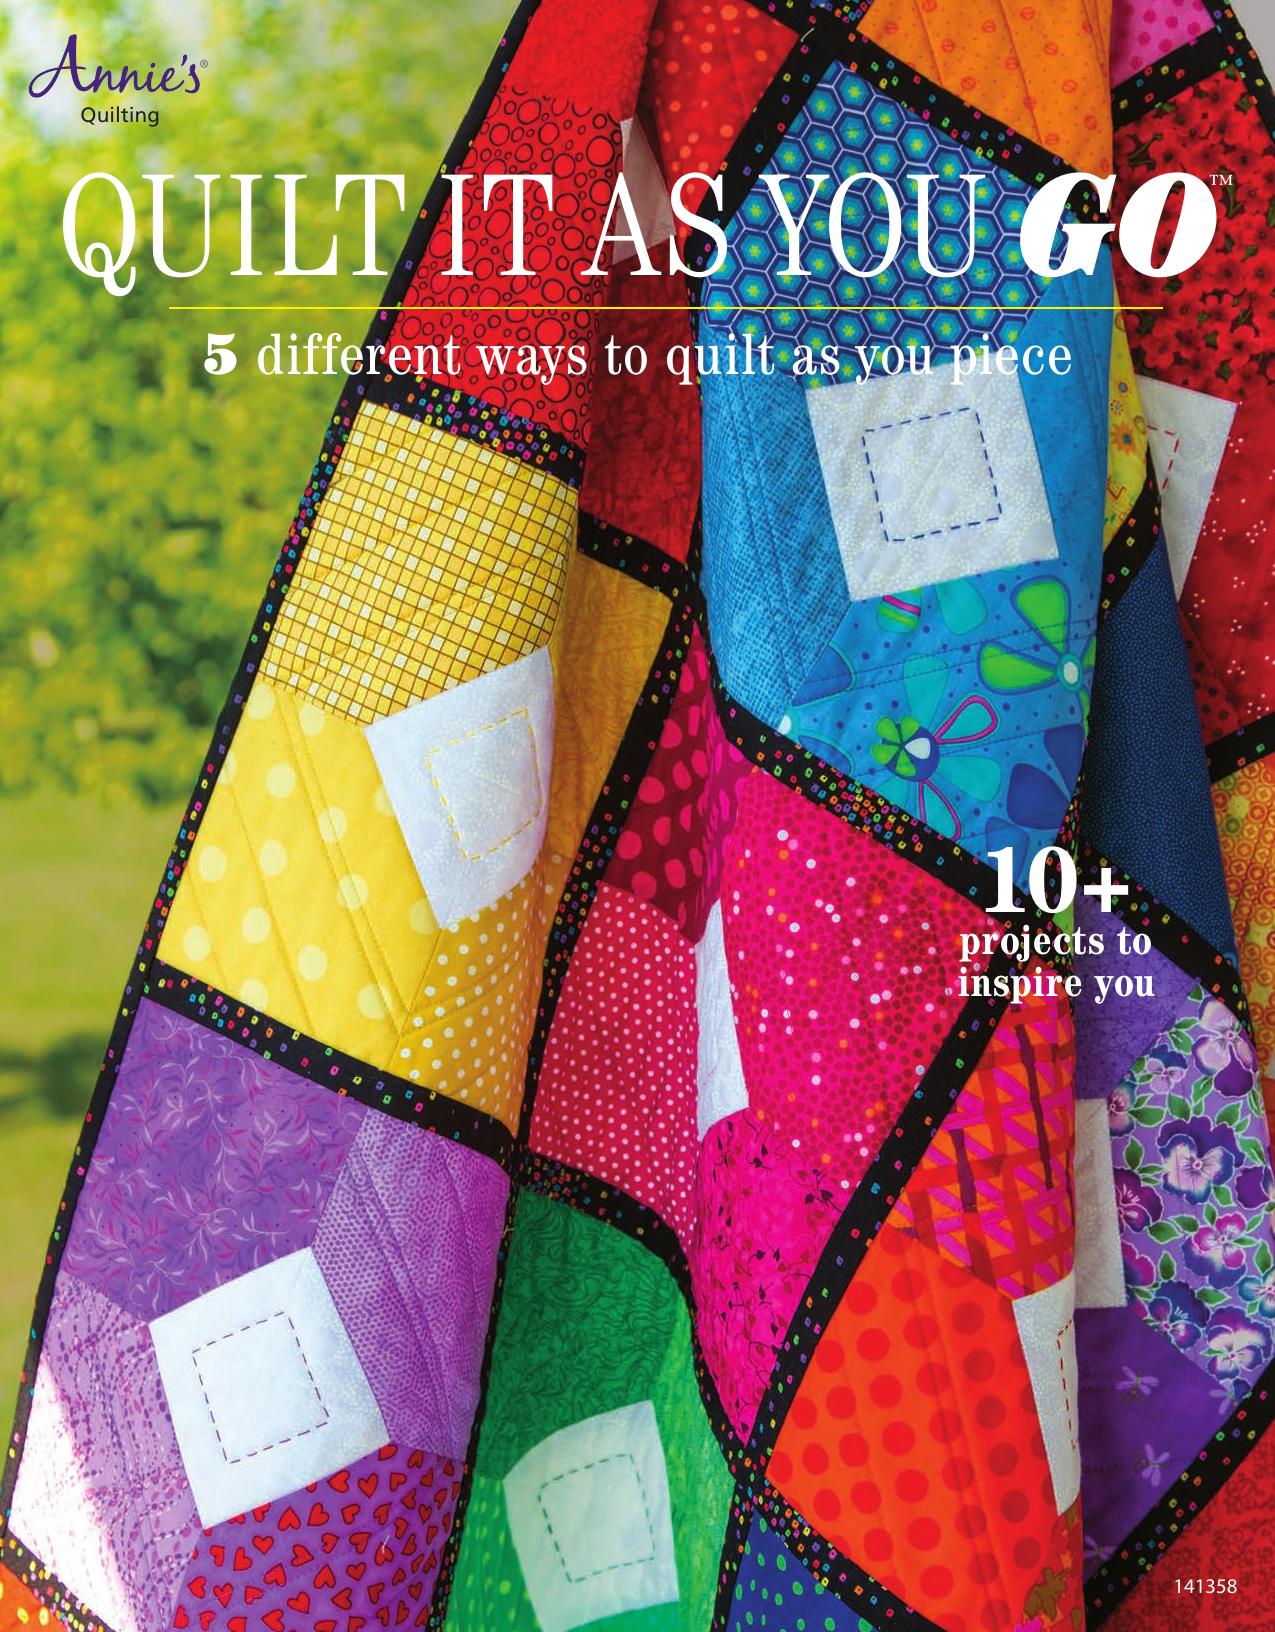 Quilt It as You Go: 5 Different Ways to Quilt as You Piece by Annie's